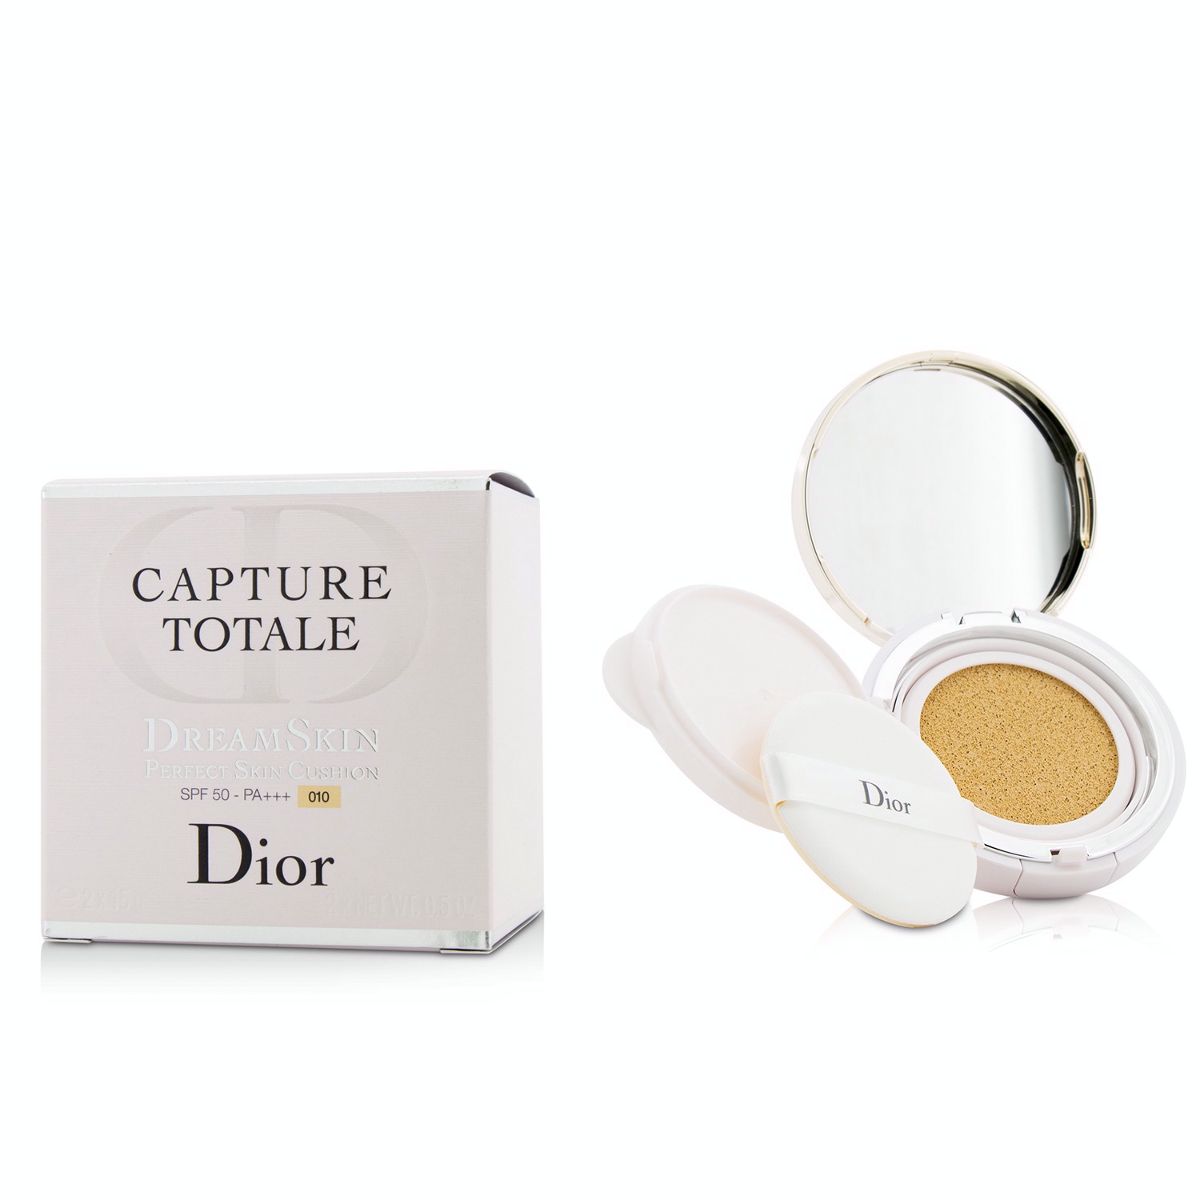 Capture Totale Dreamskin Perfect Skin Cushion SPF 50  With Extra Refill - # 010 Christian Dior Image